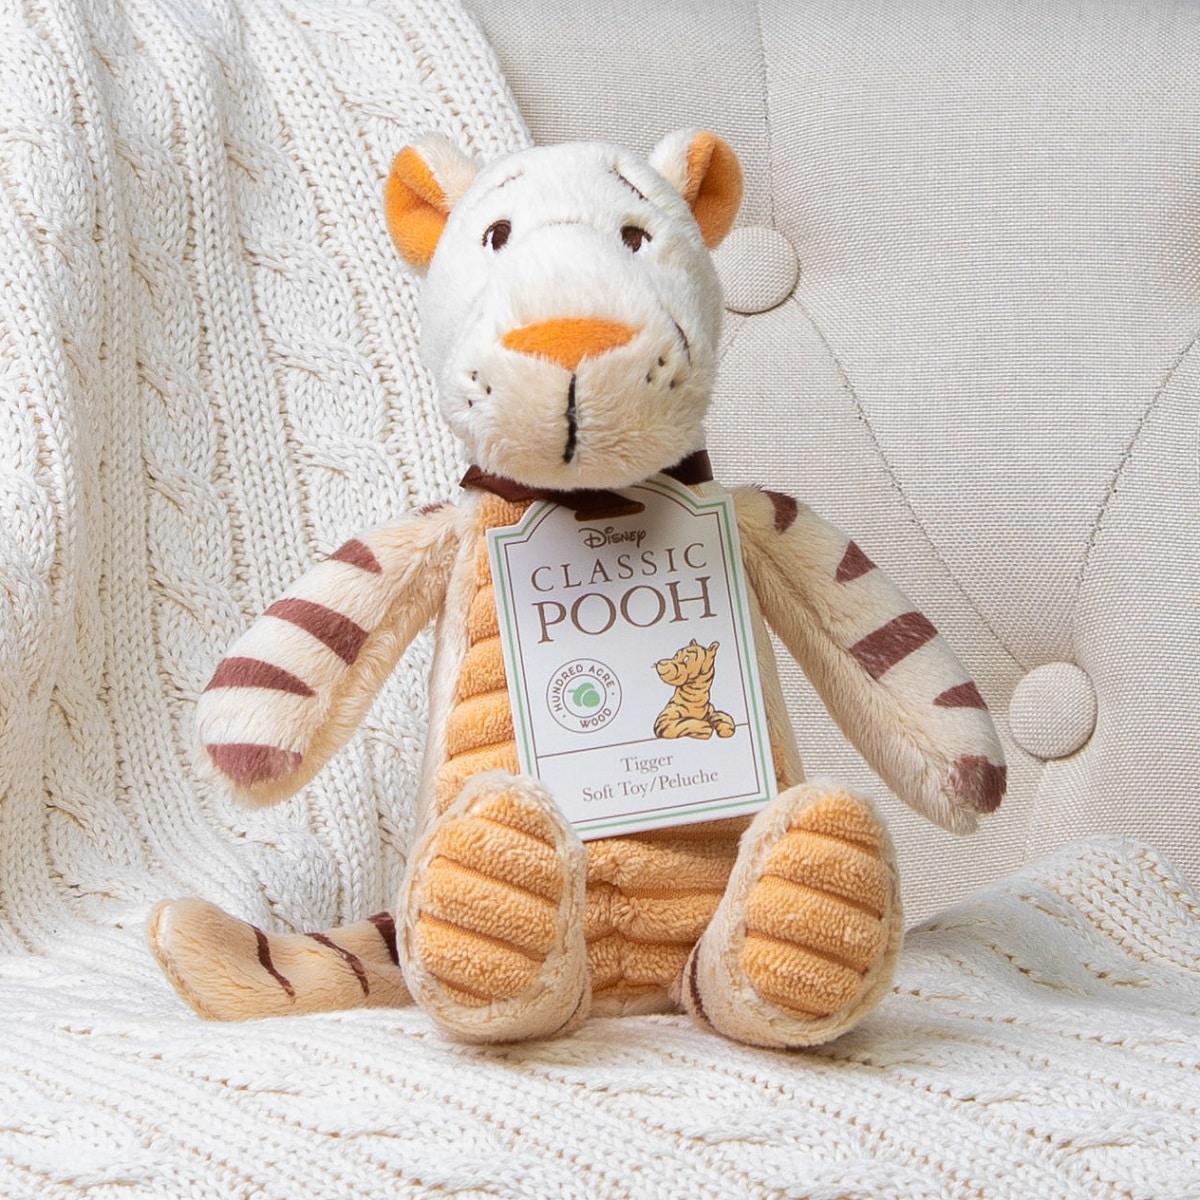 Toffee Moon personalised luxury cable baby blanket and Tigger soft toy